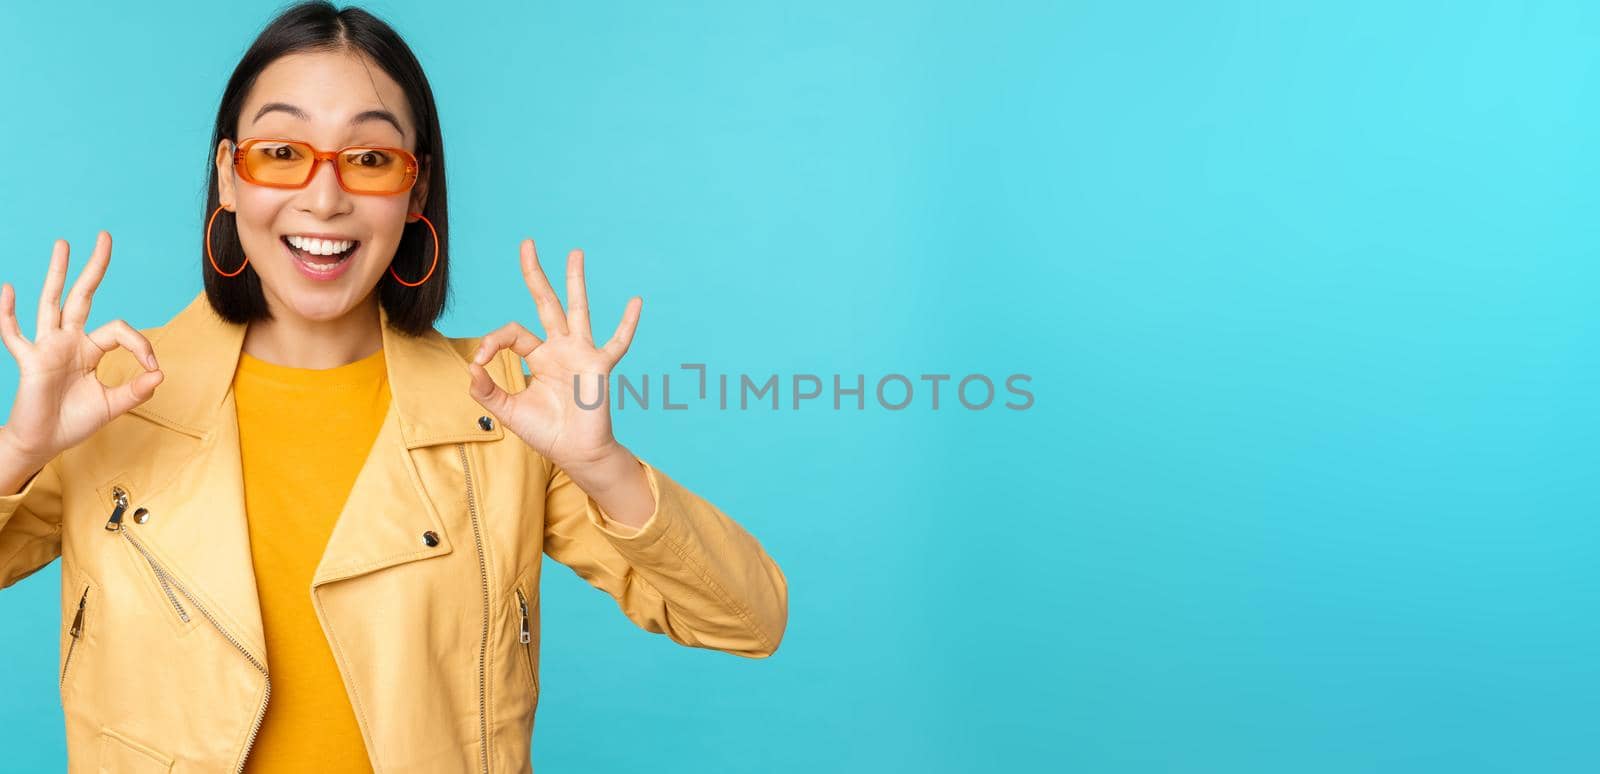 Stylish beautiful asian woman in sunglasses, smiling amazed, showing okay, ok sign, recommending smth, supports excellent choice, standing over blue background.